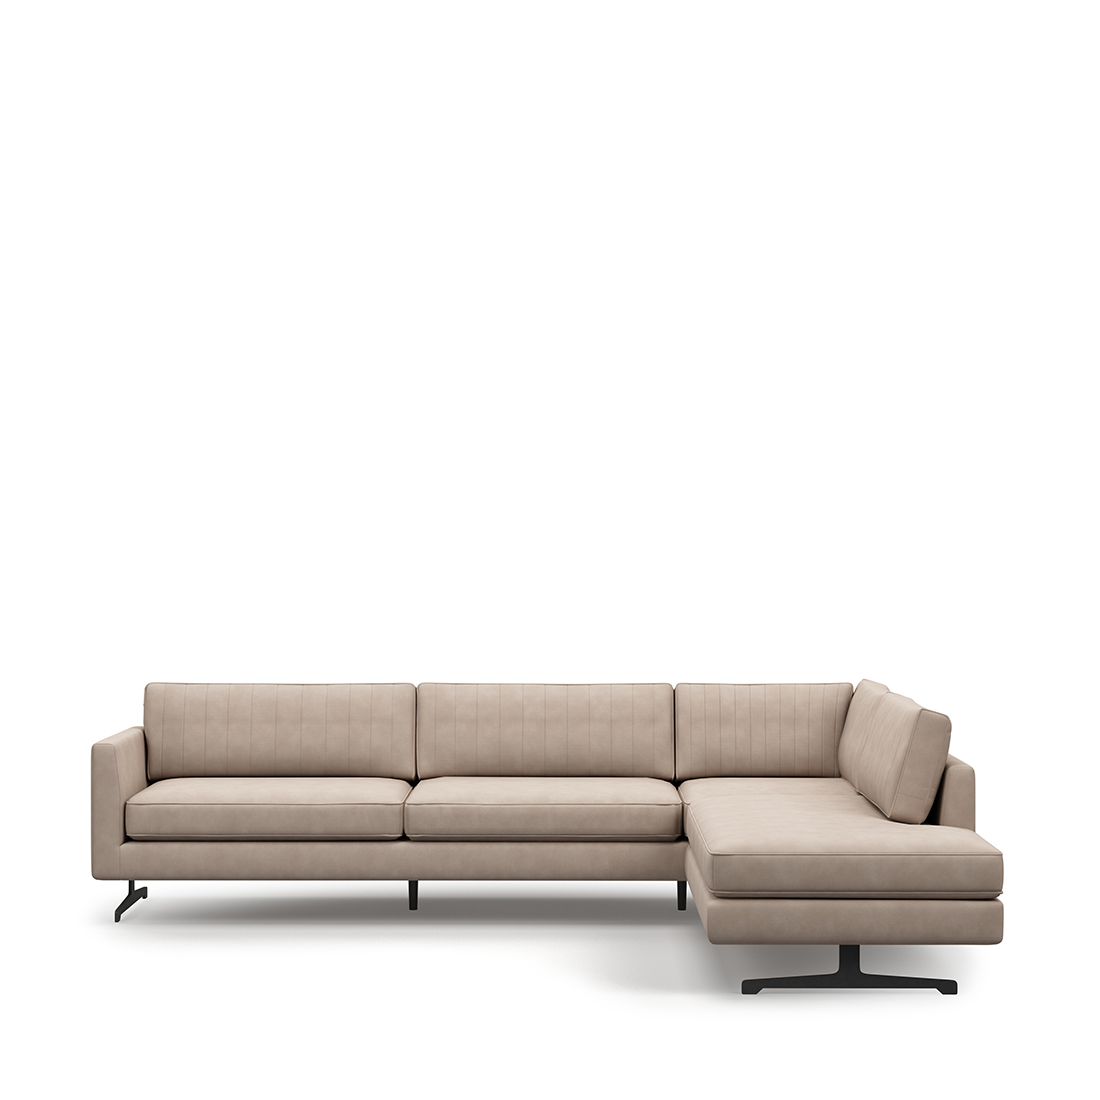 Rivièra Maison - The Camille Corner Sofa Right, recycled weave, brompton beige - Kleur: beige